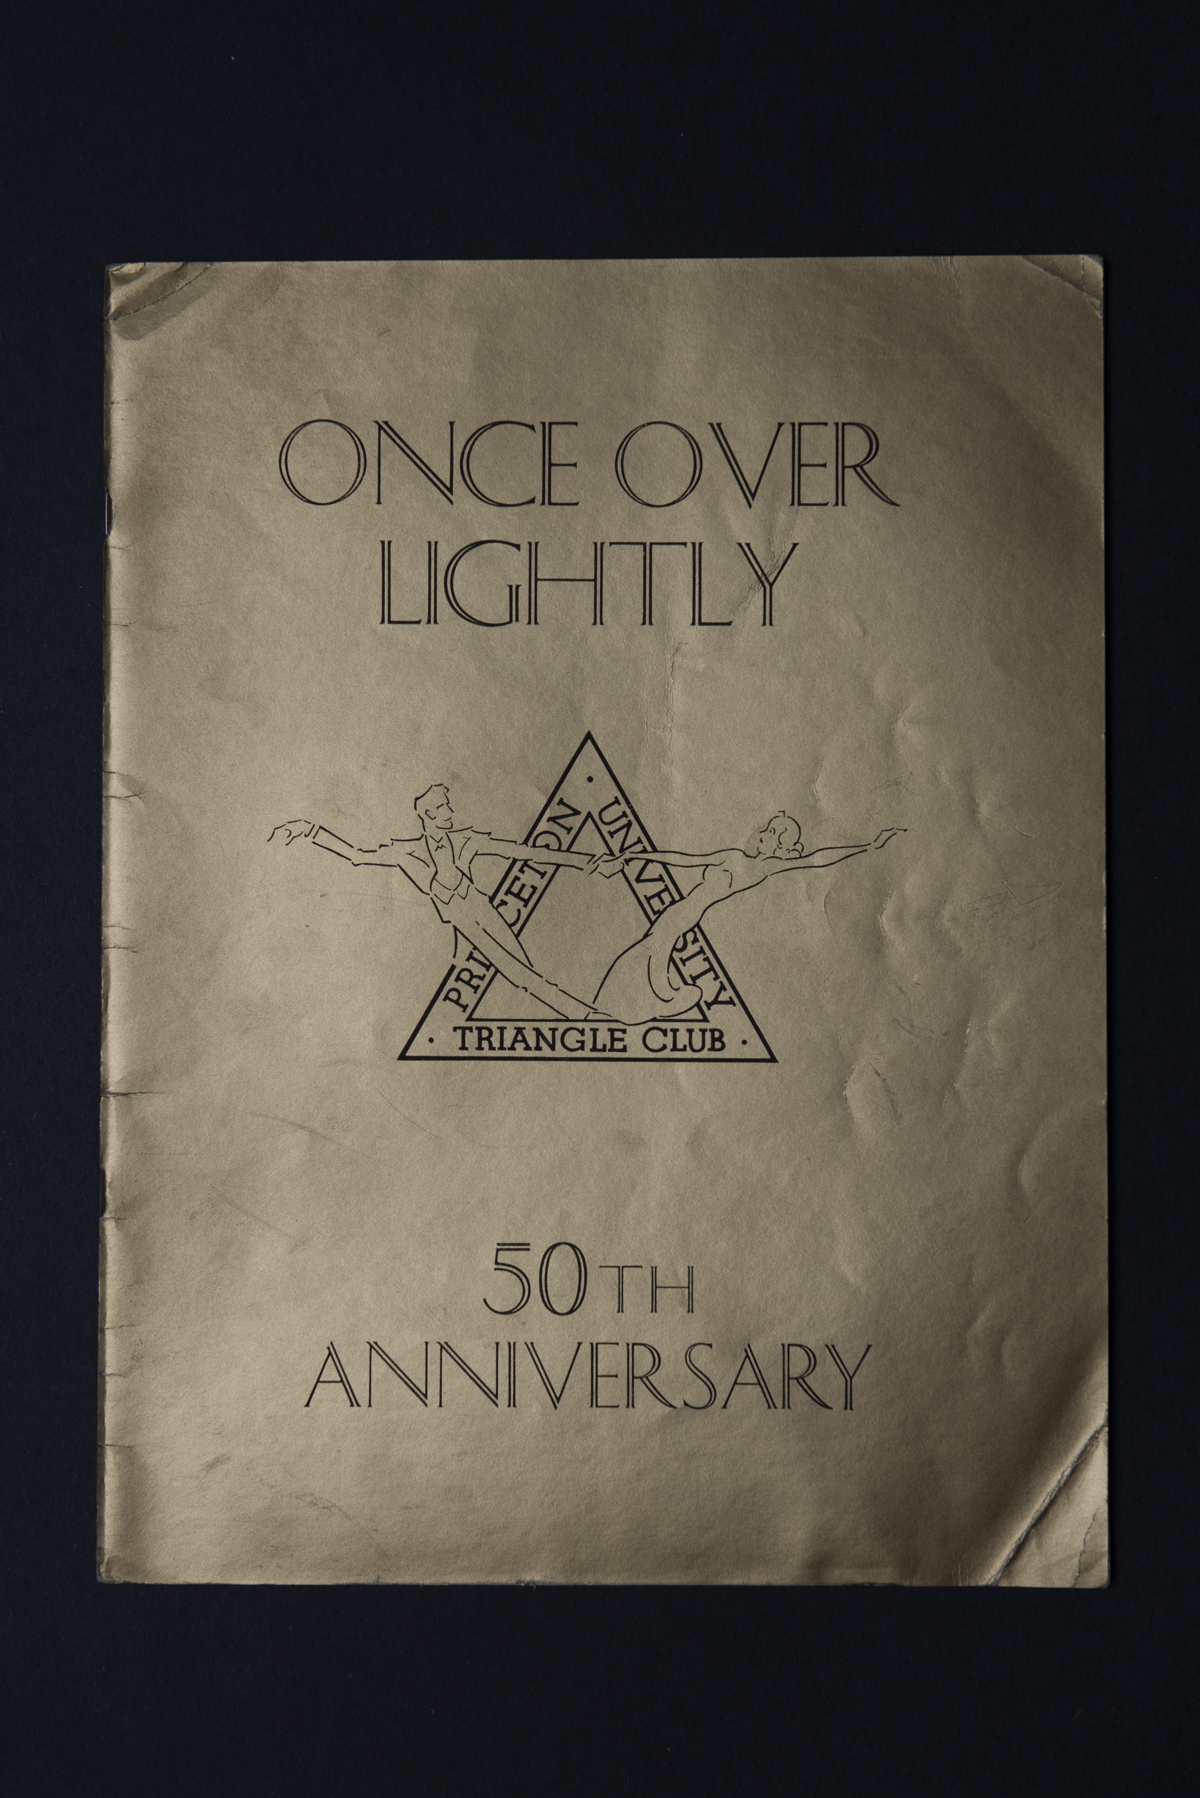 Once Over Lightly Playbill